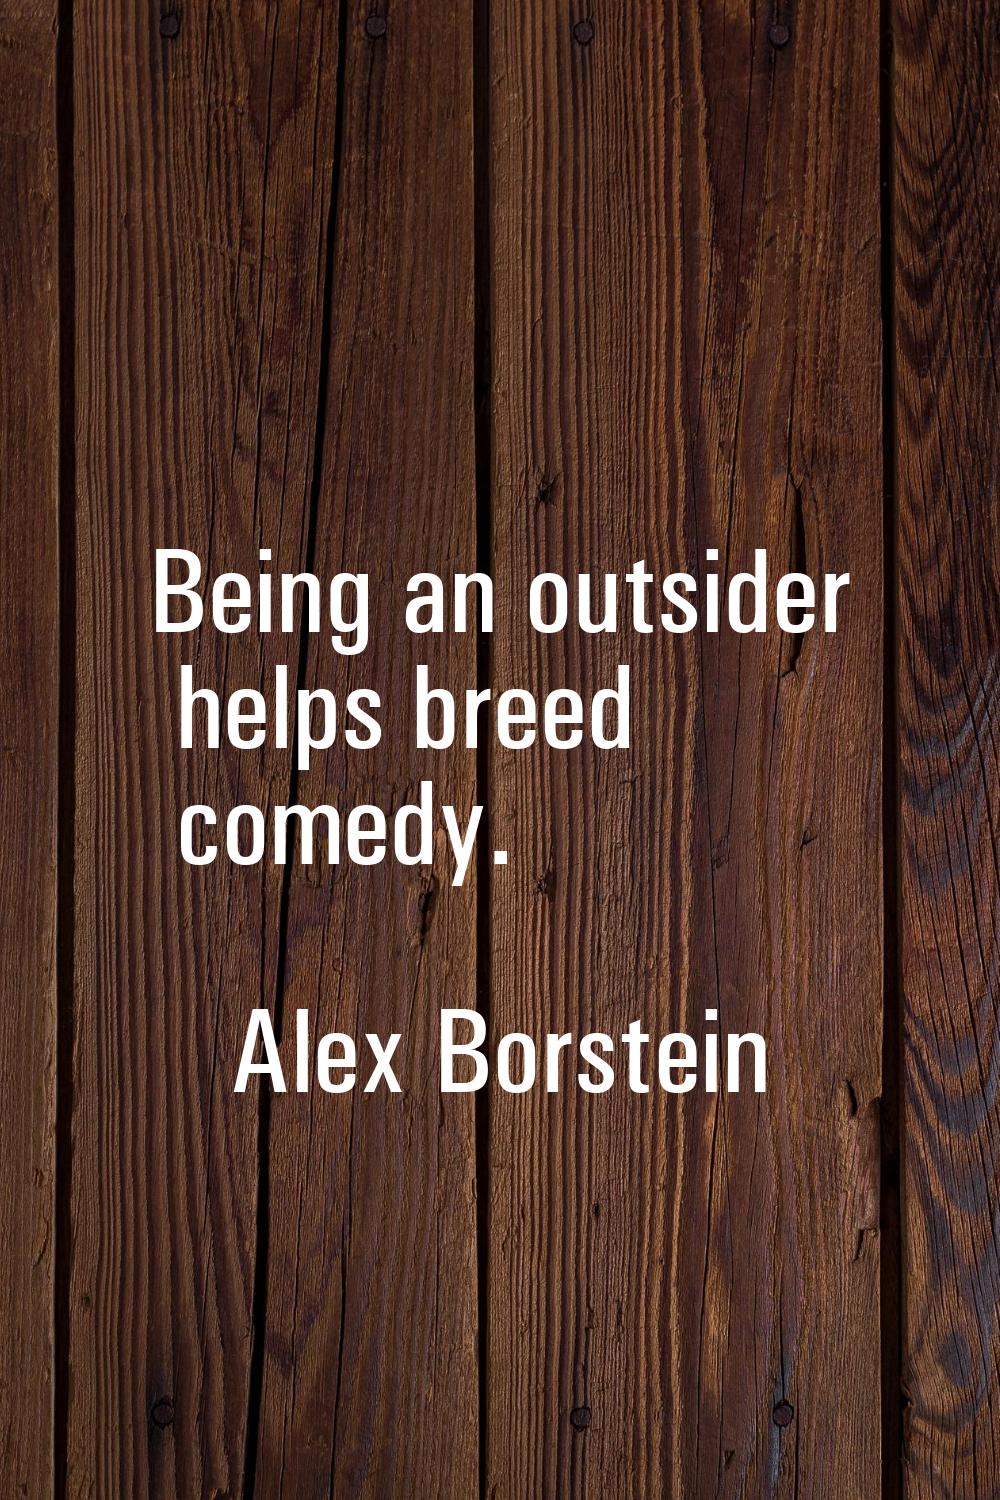 Being an outsider helps breed comedy.